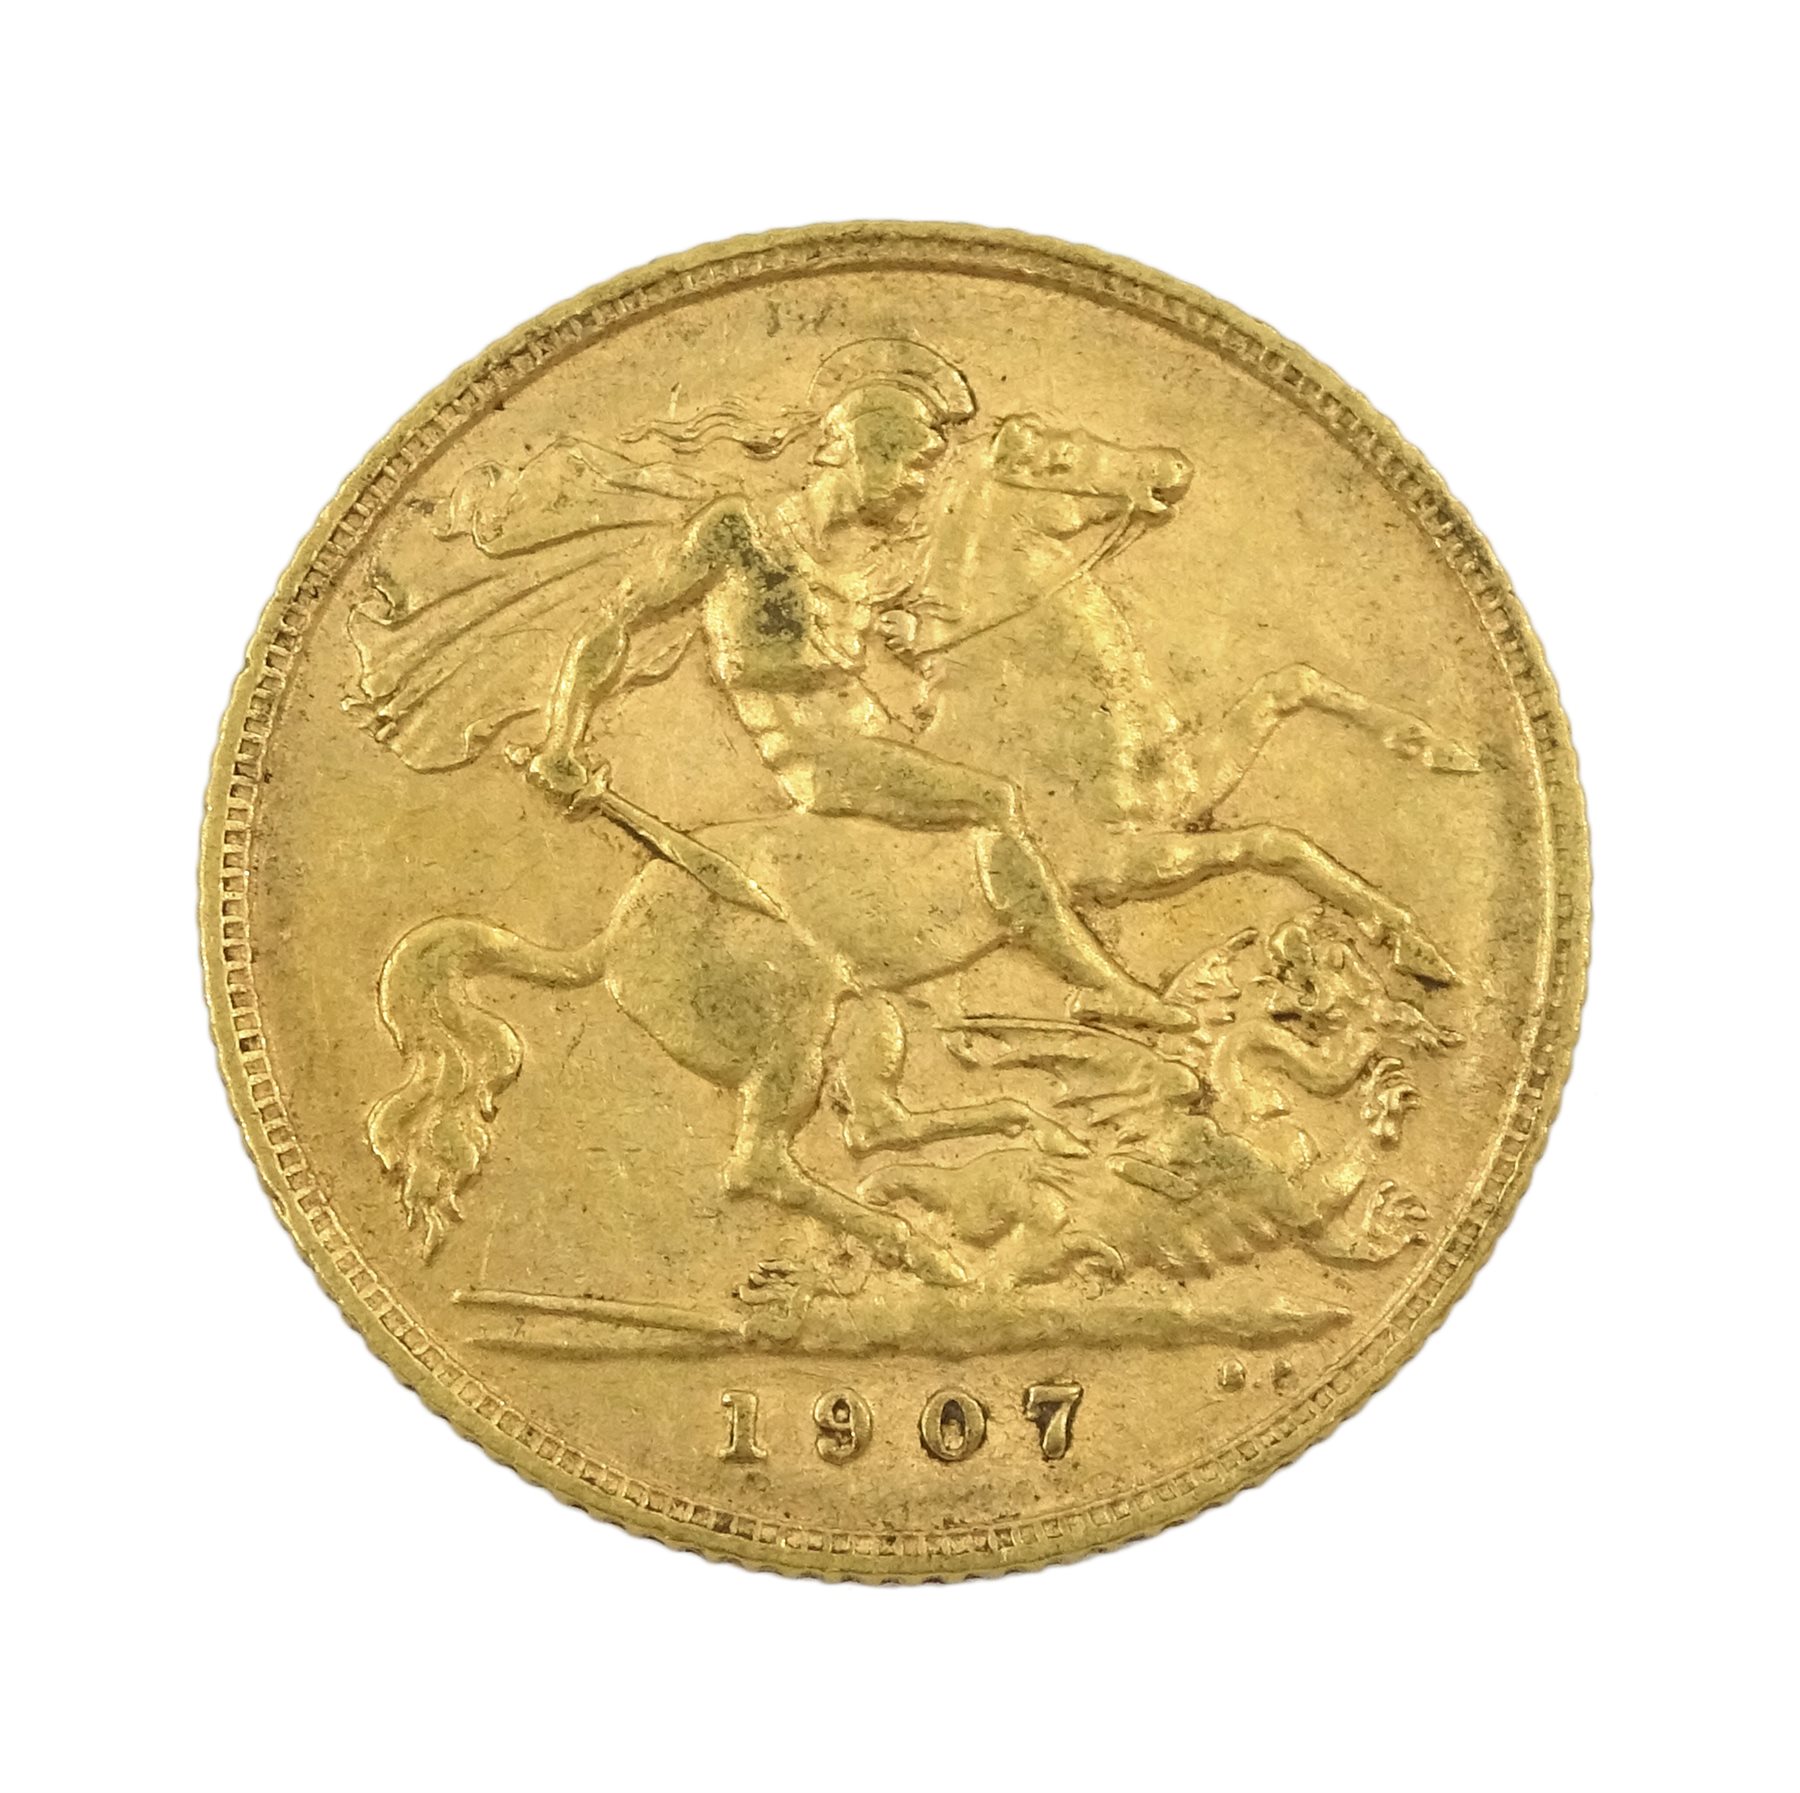 King Edward VII 1907 gold half sovereign coin - Jewellery, Watches